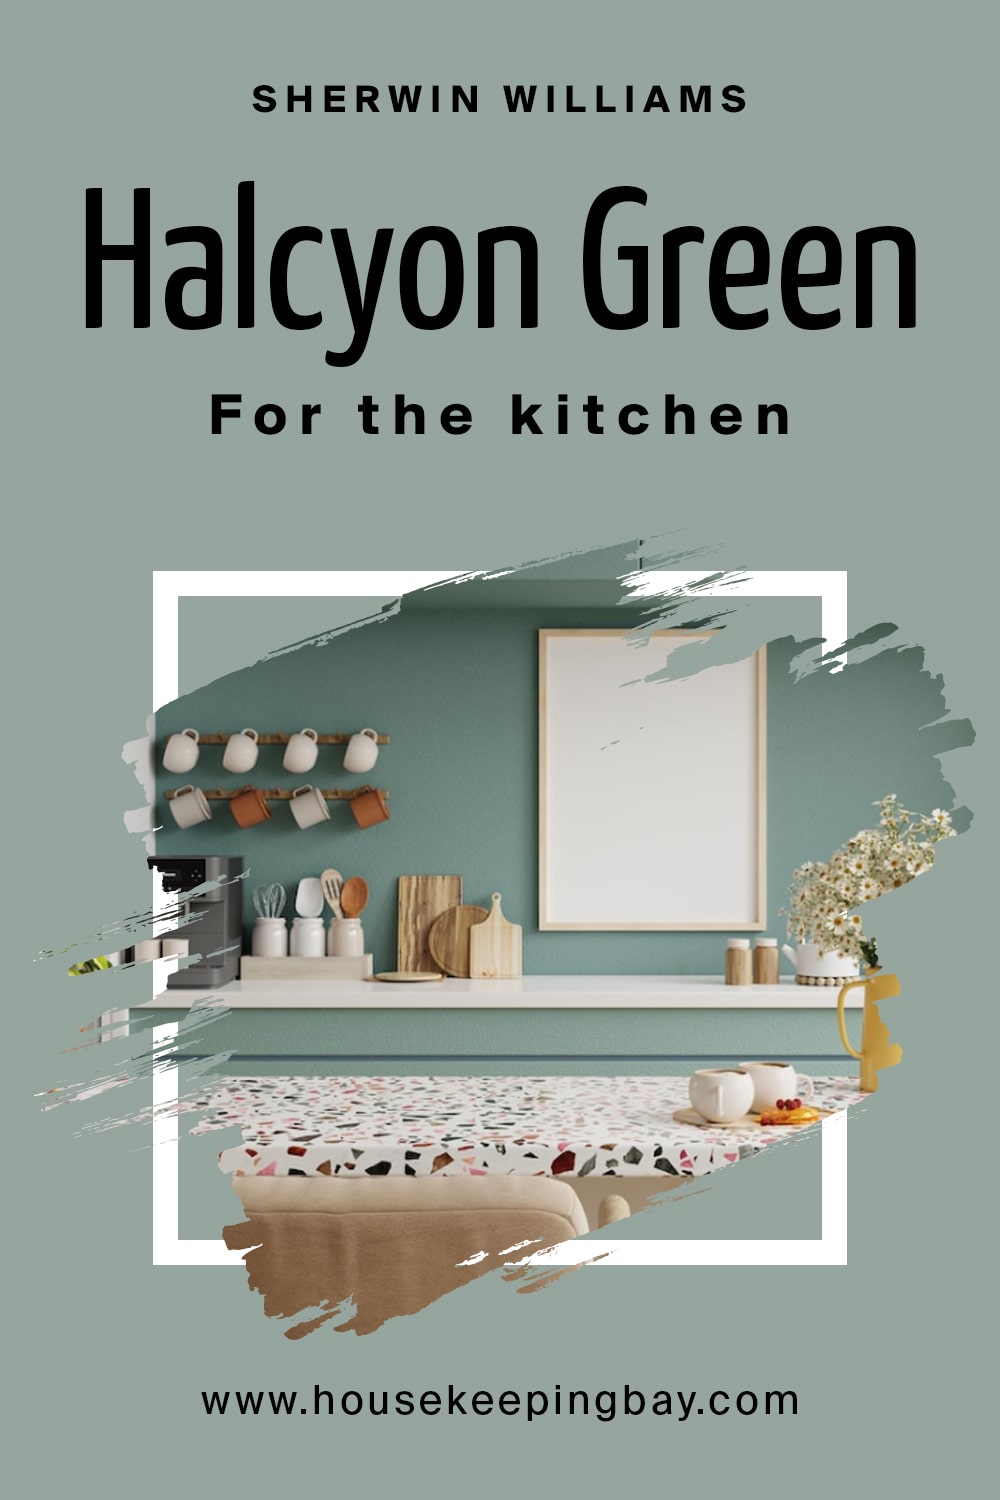 Sherwin Williams. Halcyon Green For the kitchen